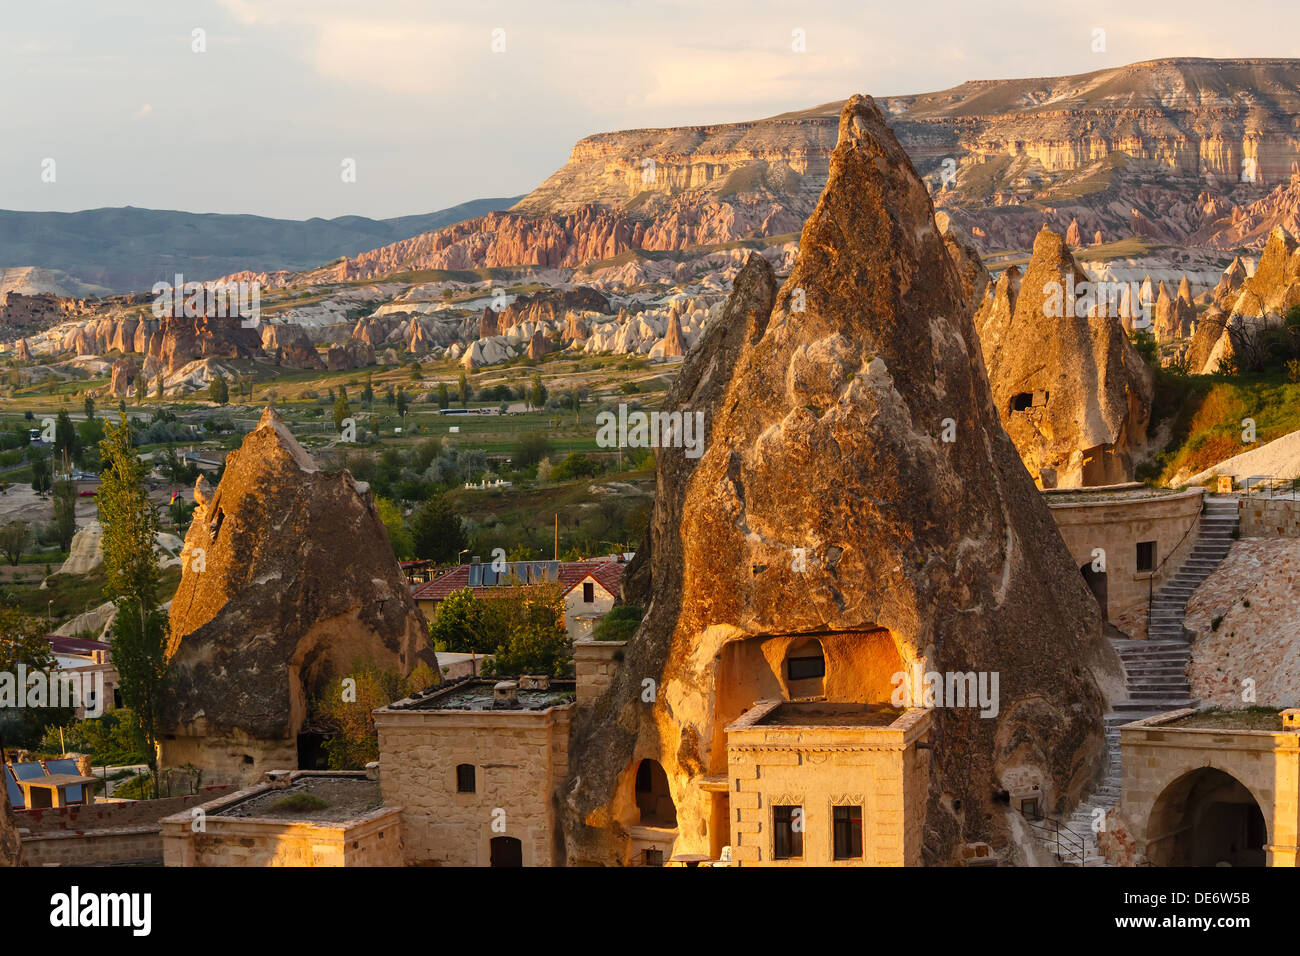 Hotel rooms cut down in the rock in the light of the setting sun. Cappadocia, Turkey Stock Photo